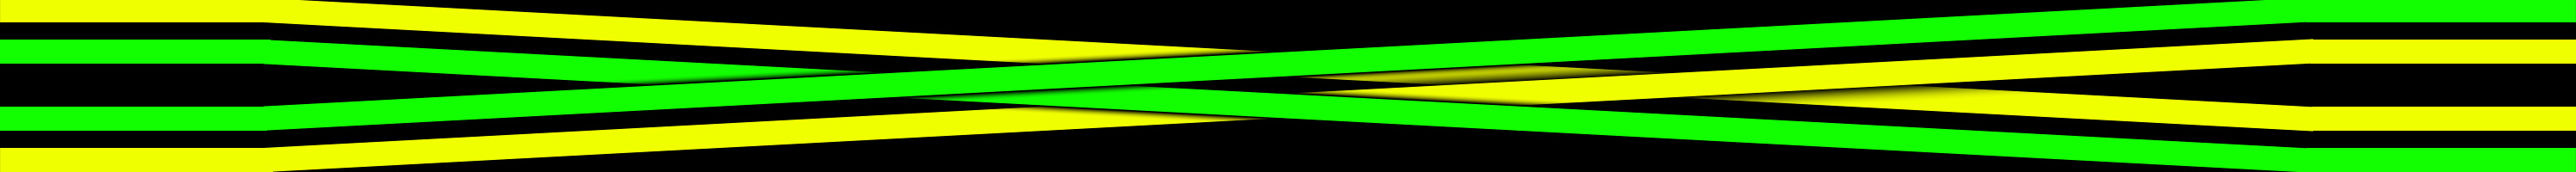 swapDouble greenYellow 3Dcross2